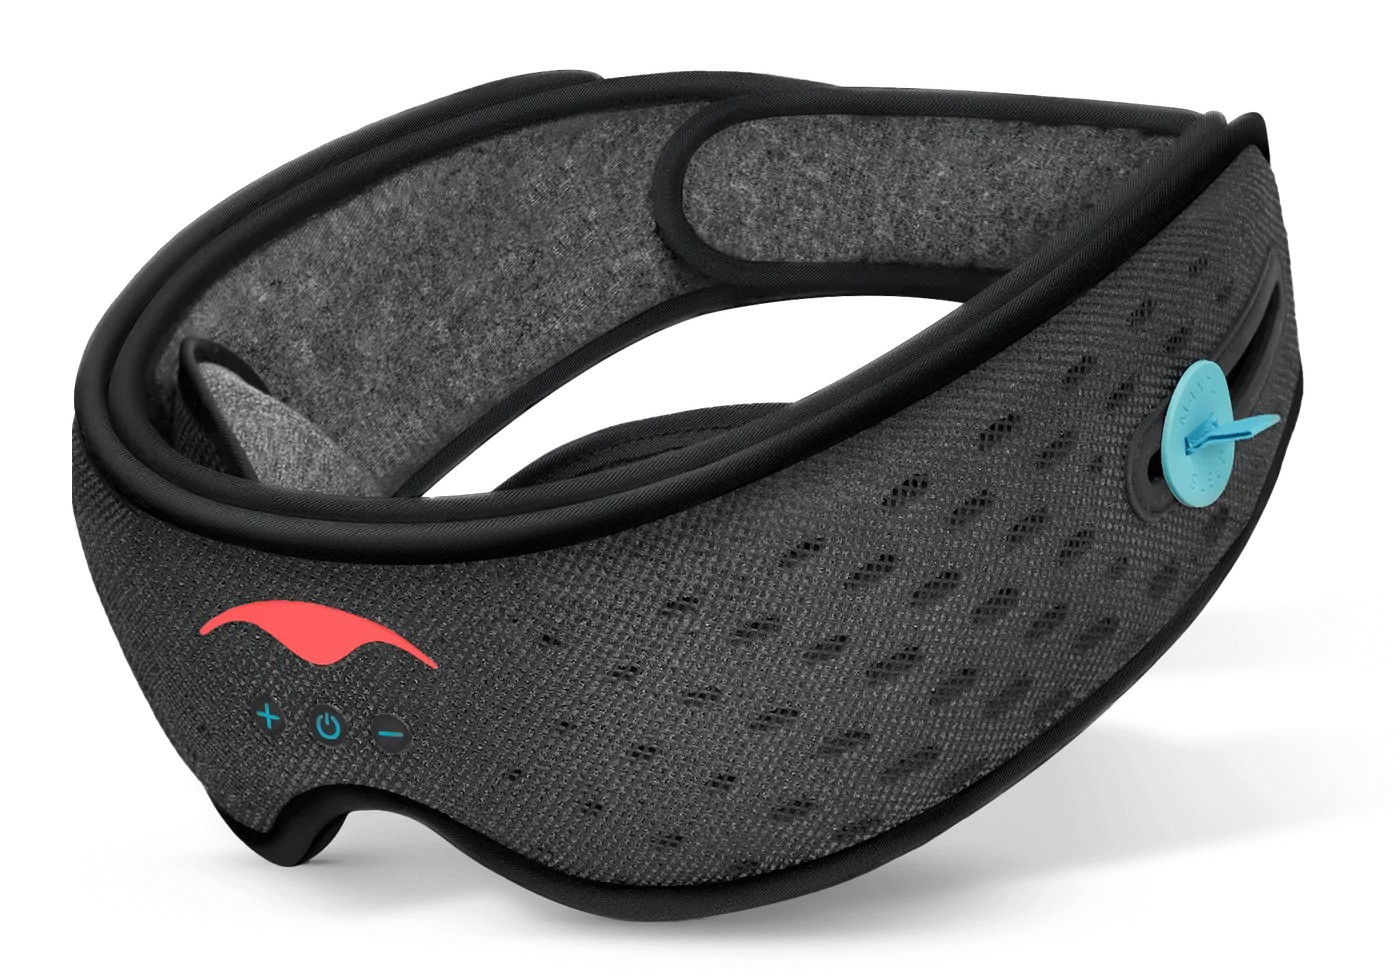 A black Bluetooth sleep mask that works for light and sound.